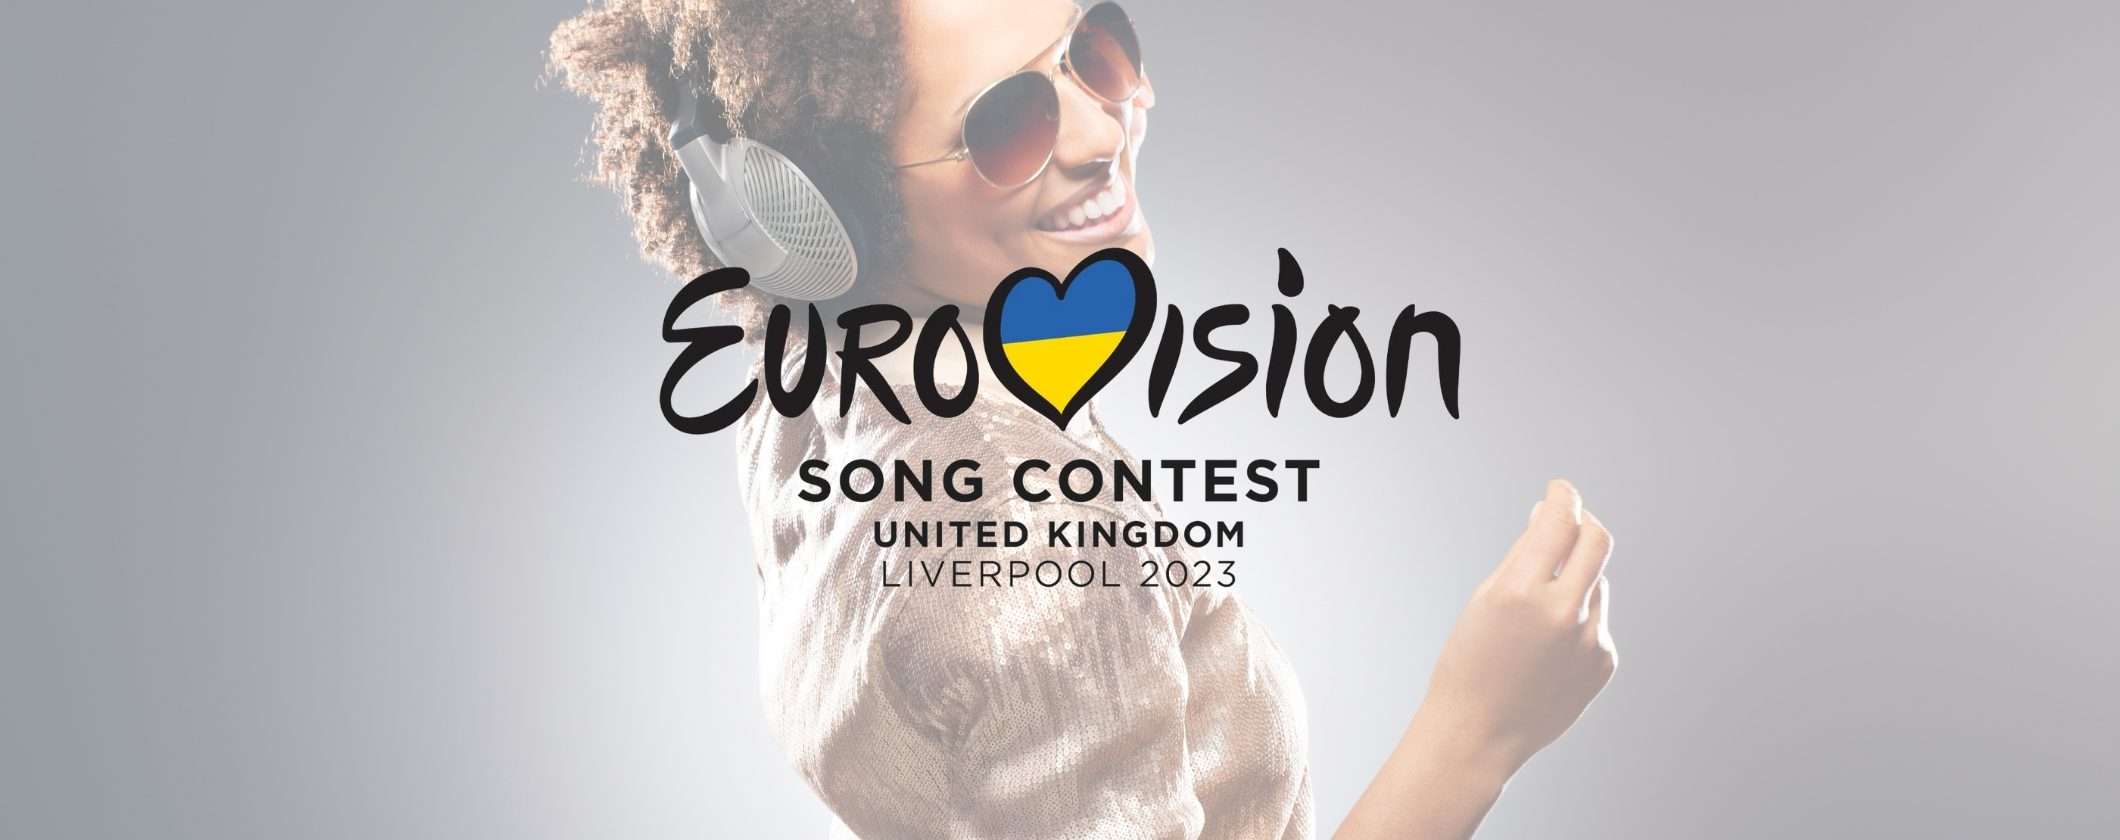 Eurovision Song Contest: guarda le Semifinali in streaming